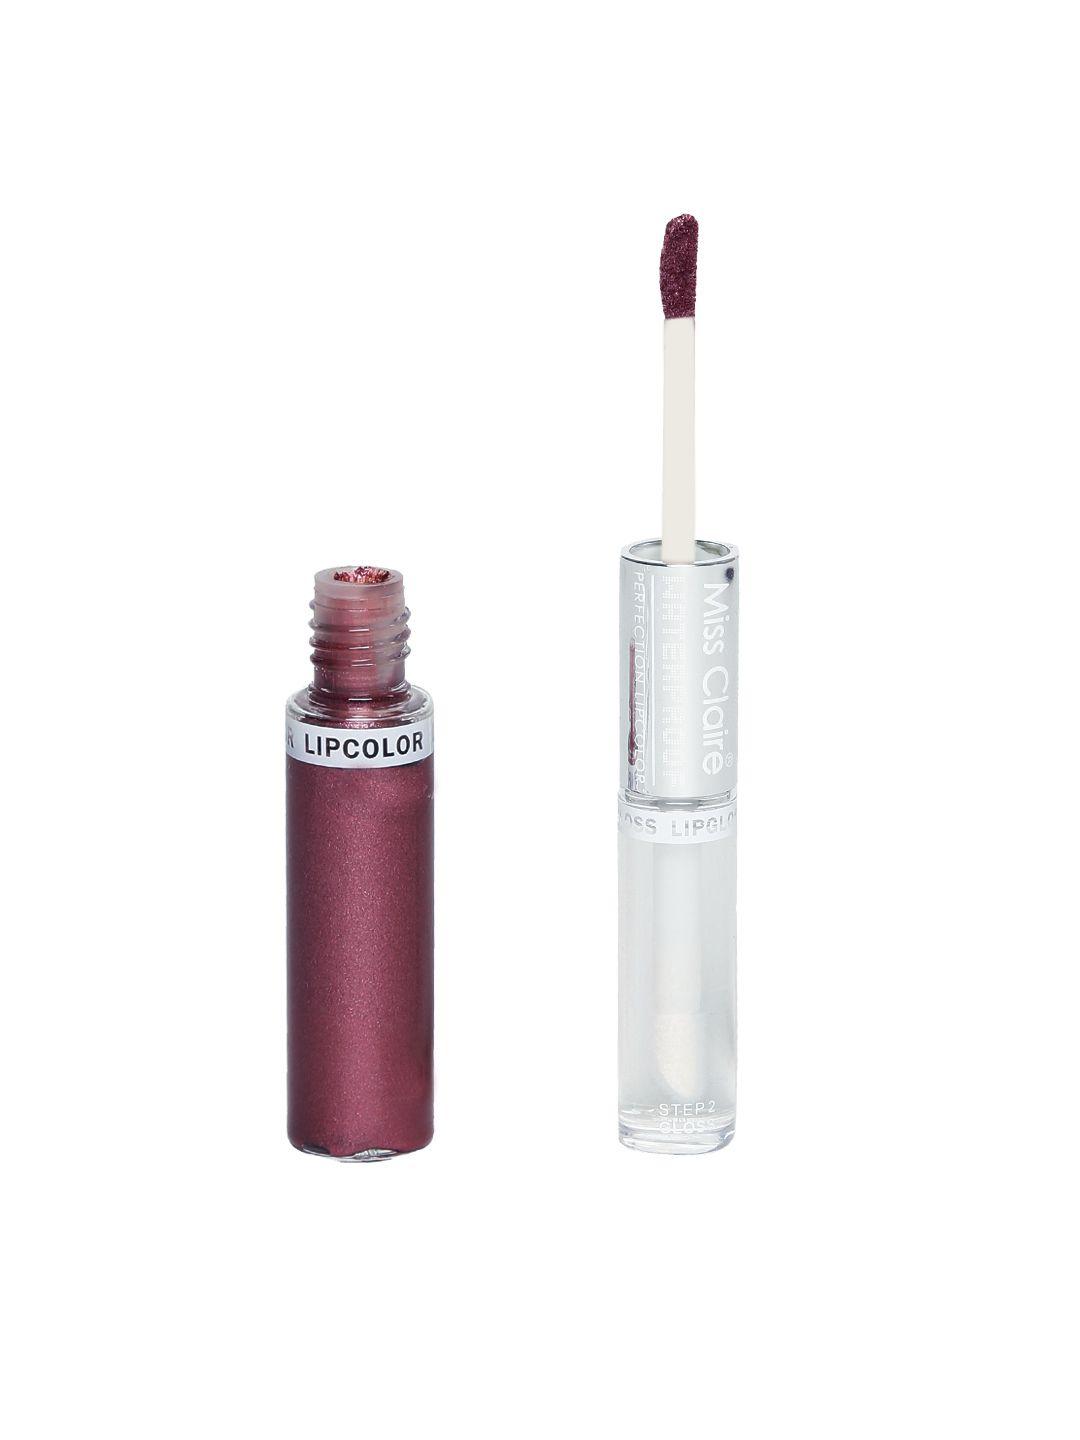 miss claire 29 waterproof perfection lip color & lip gloss 10 ml